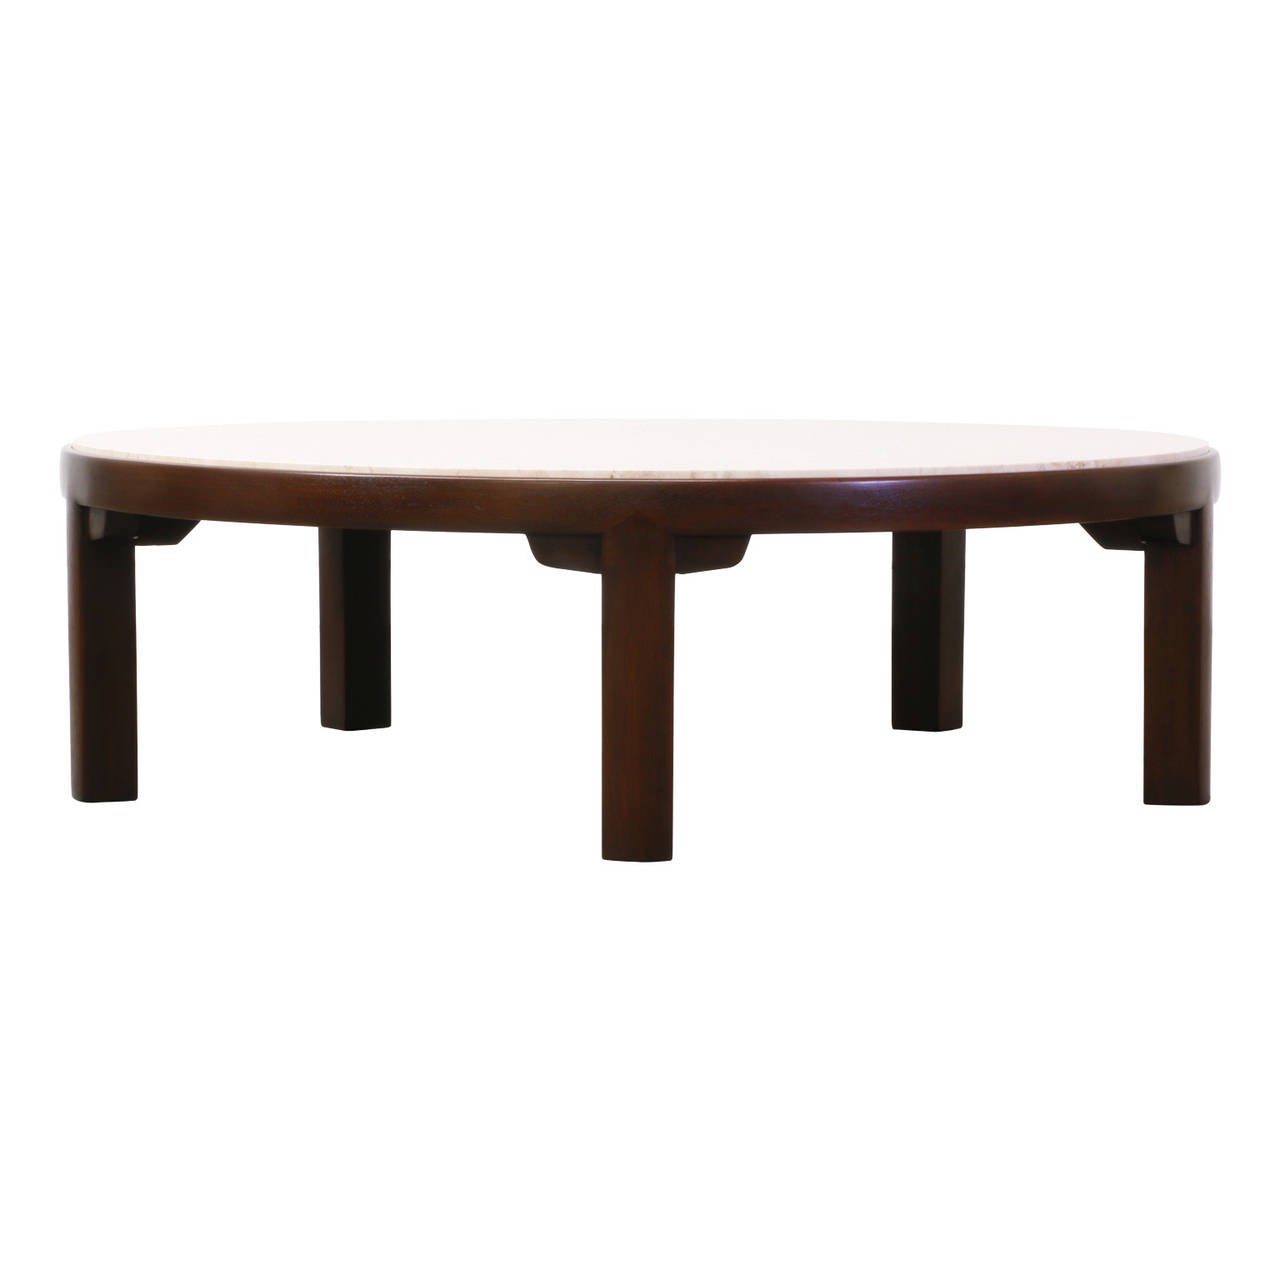 Designer: Edward J. Wormley.
Manufacturer: Dunbar.
Period/Style: Mid-Century Modern.
Country: United States.
Date: 1950s.

Dimensions: 14.75″ H x 48.5″ W.
Materials: Travertine, Mahogany.
Condition: Excellent, newly refinished and new